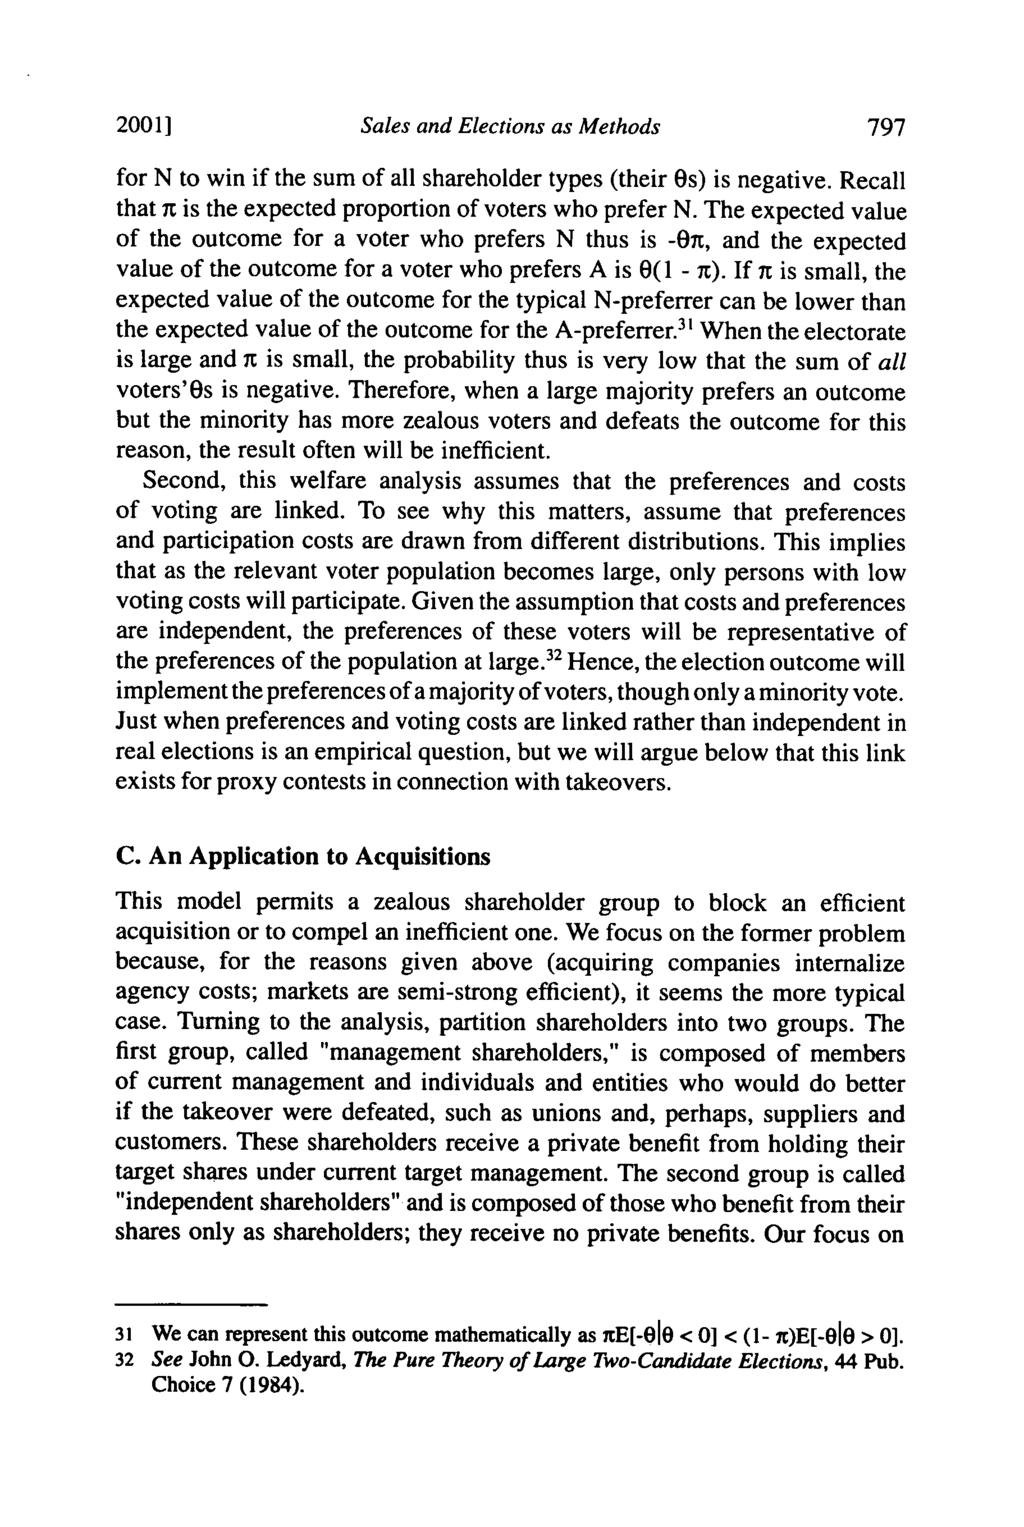 20011 Sales and Elections as Methods for N to win if the sum of all shareholder types (their Os) is negative. Recall that it is the expected proportion of voters who prefer N.